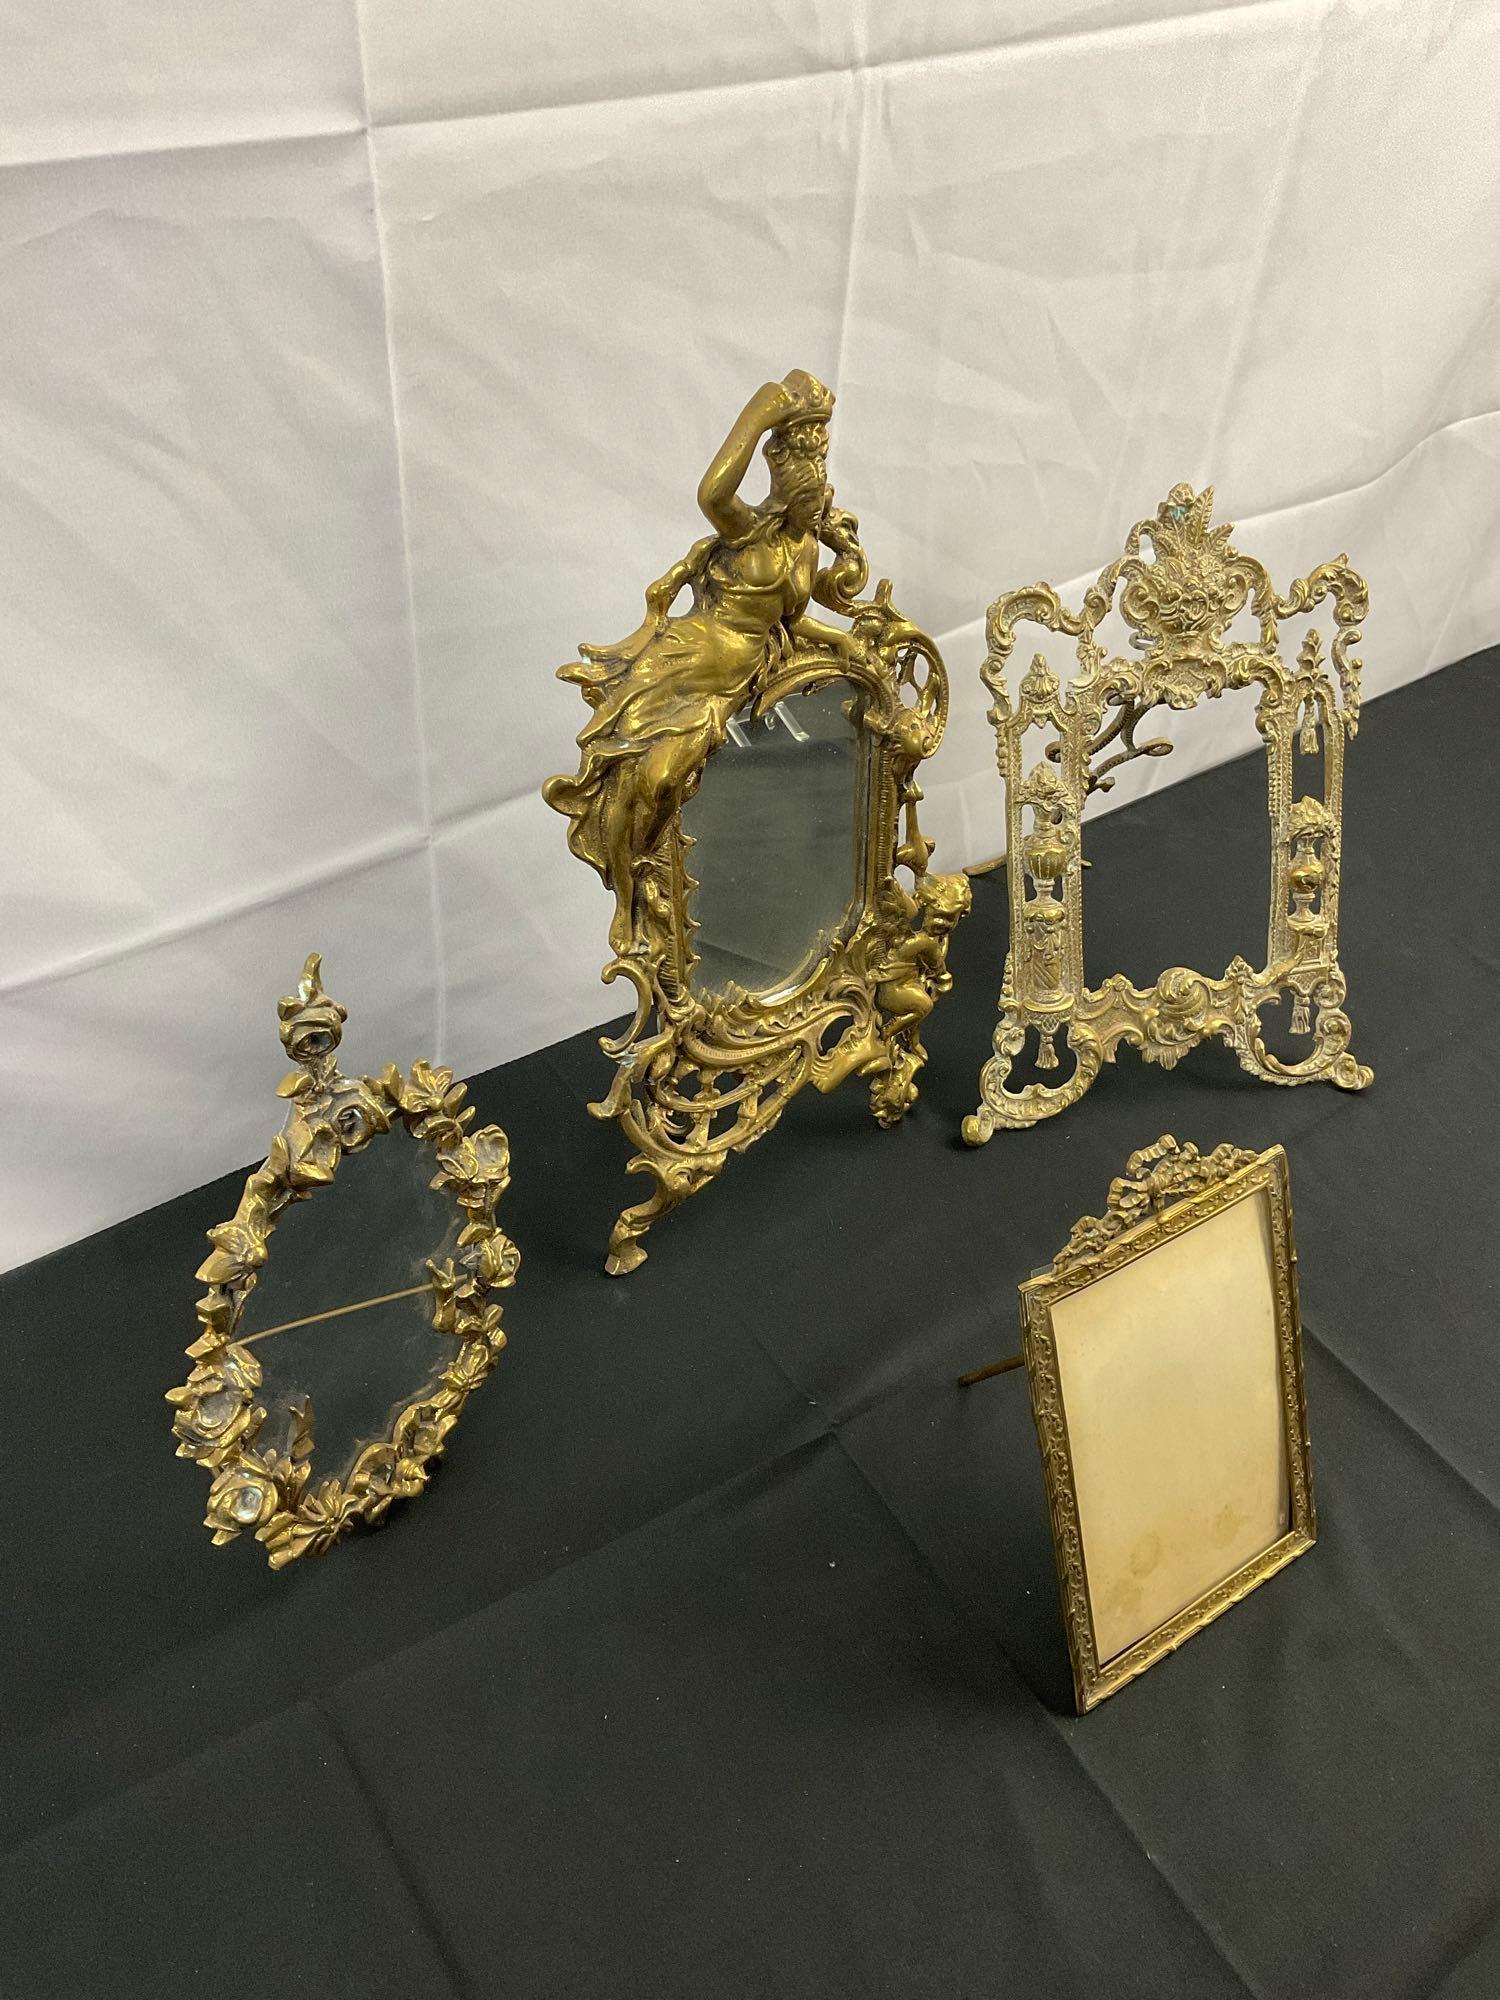 4 pcs Vintage Brass Decorative Table Picture Frames. Classical Style. Brevete SGDC. See pics.